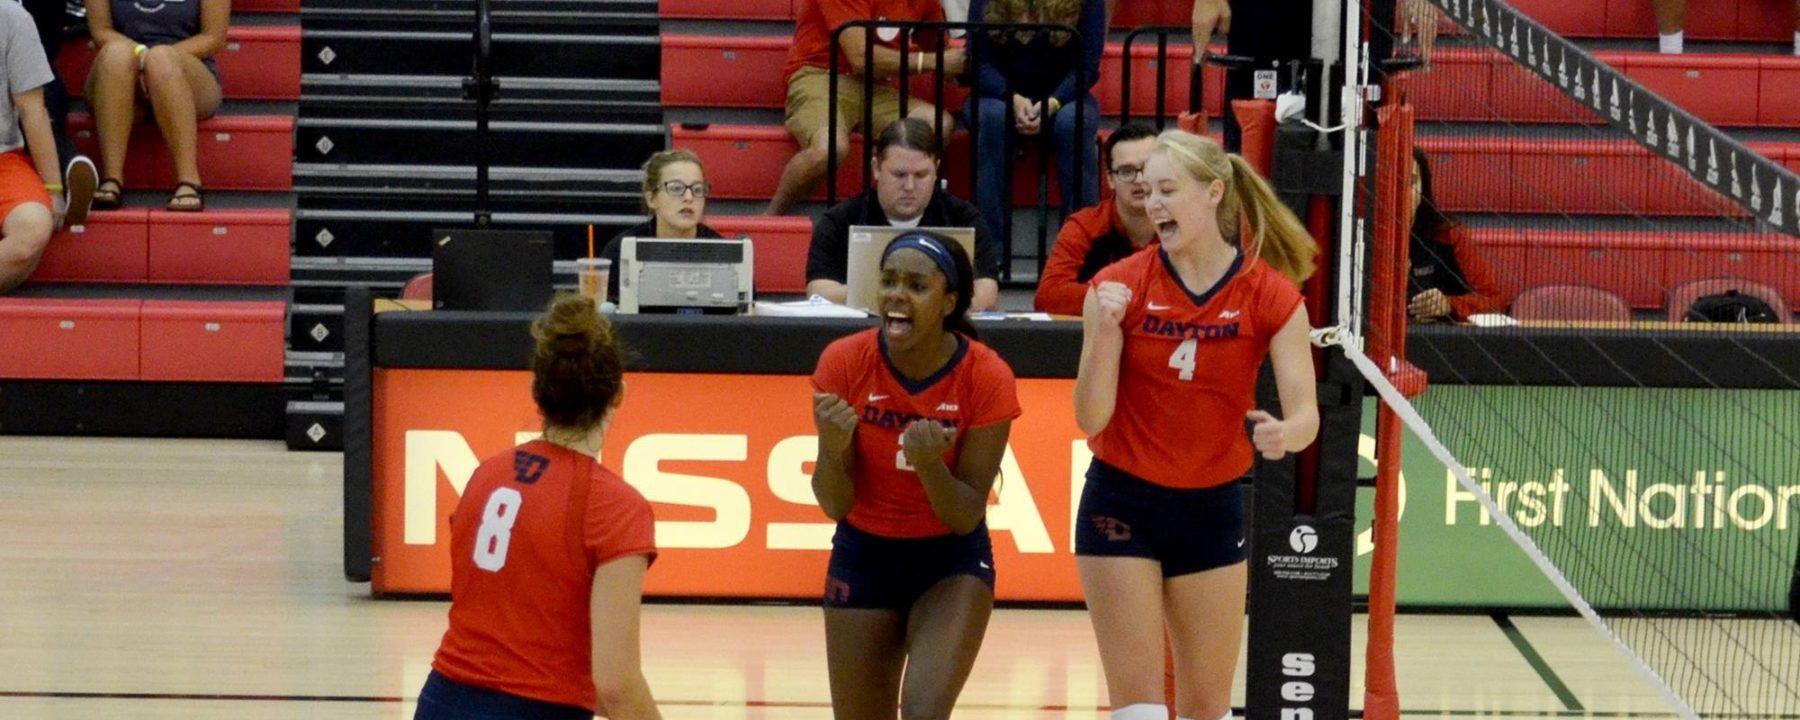 Ohio & Dayton Meet for In-State Battle of ’16 NCAA Tourn. Teams; Aug. 29 Preview